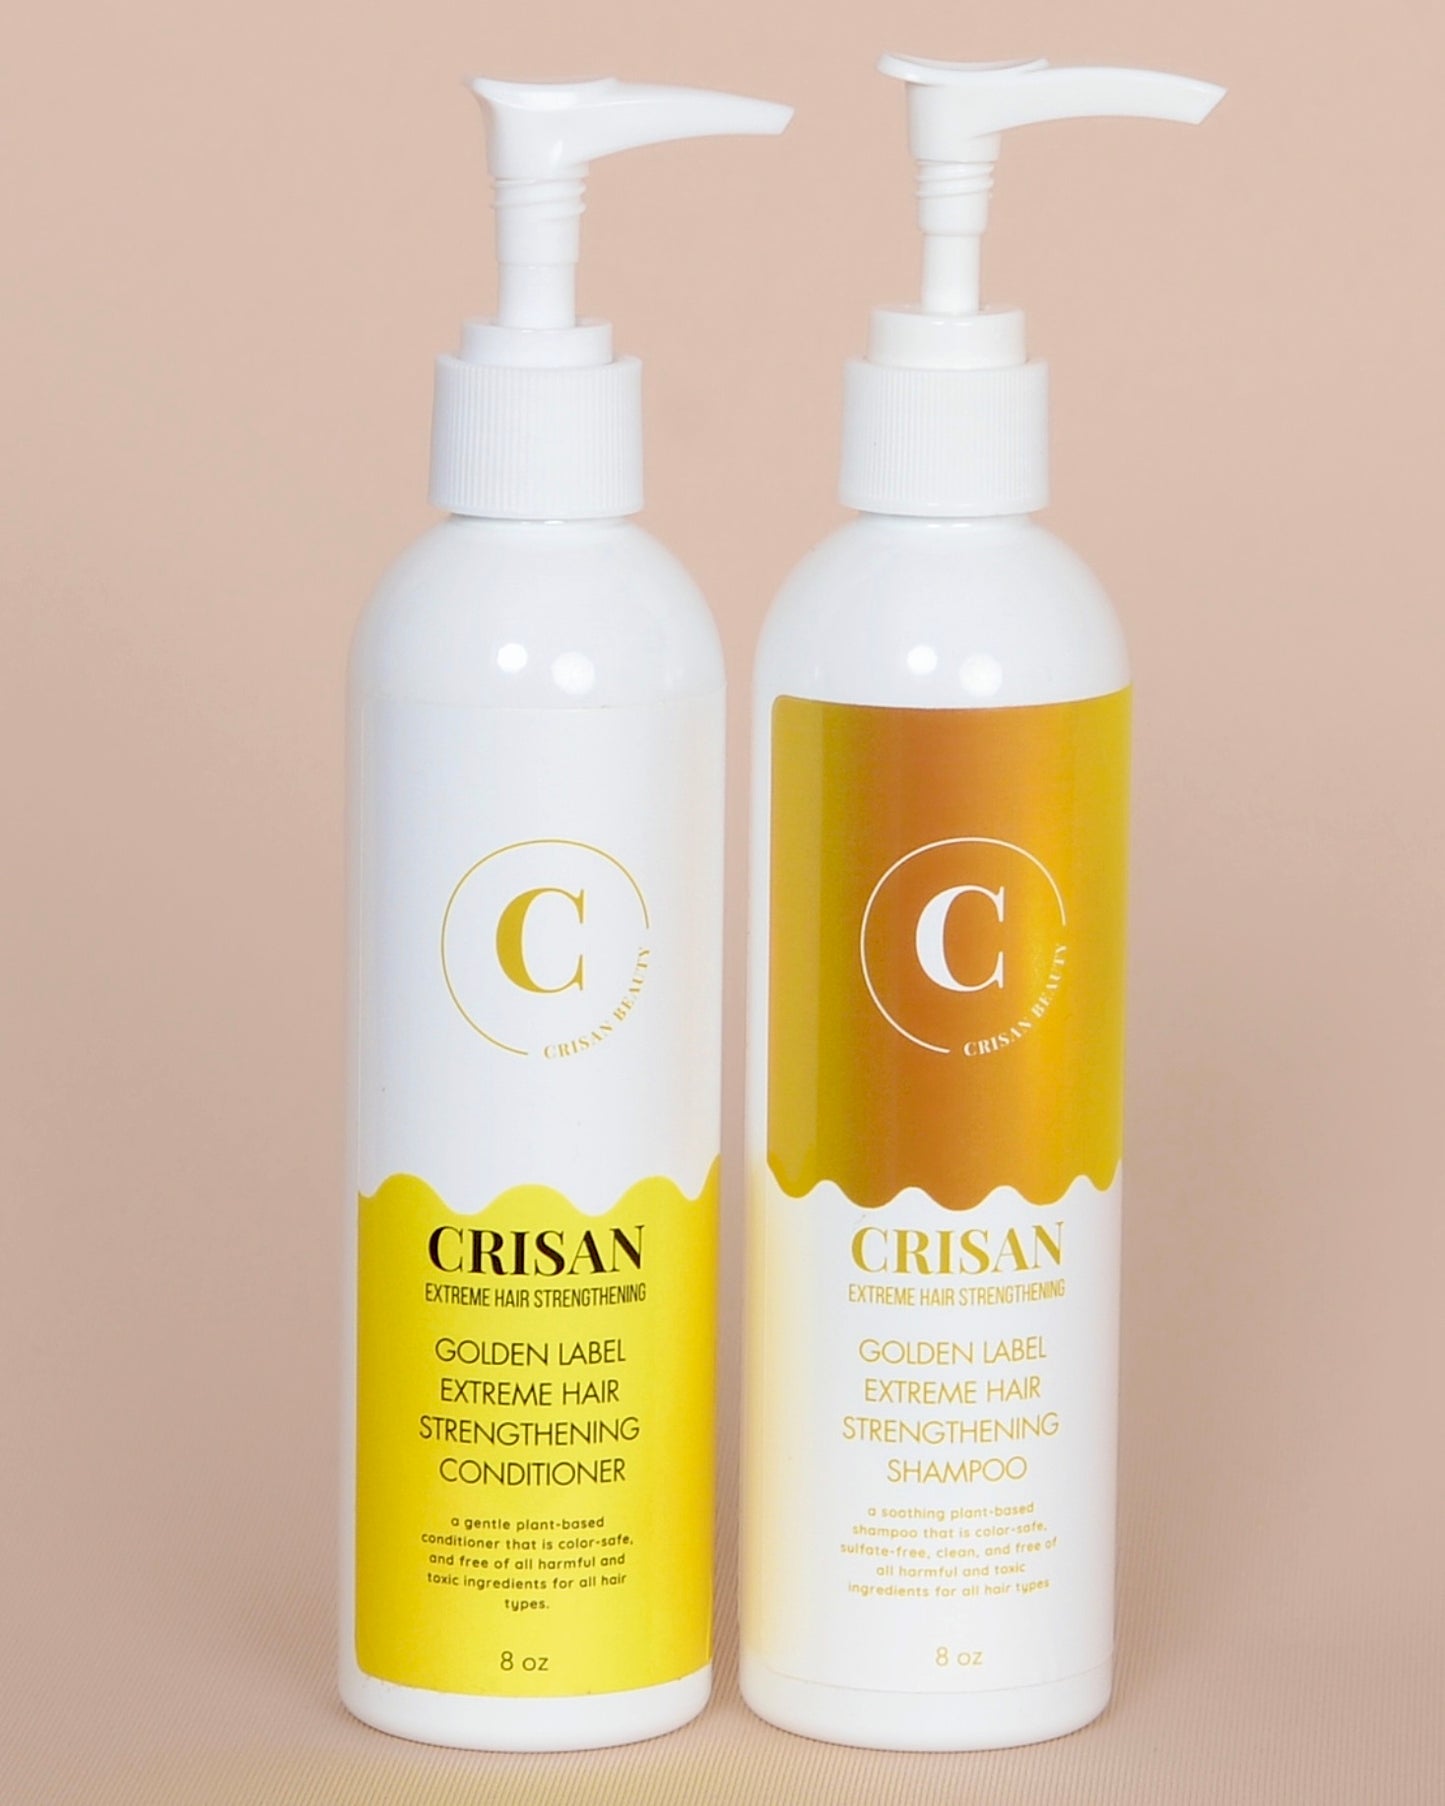 Golden-Label Extreme Hair Strengthening Shampoo & Conditioner